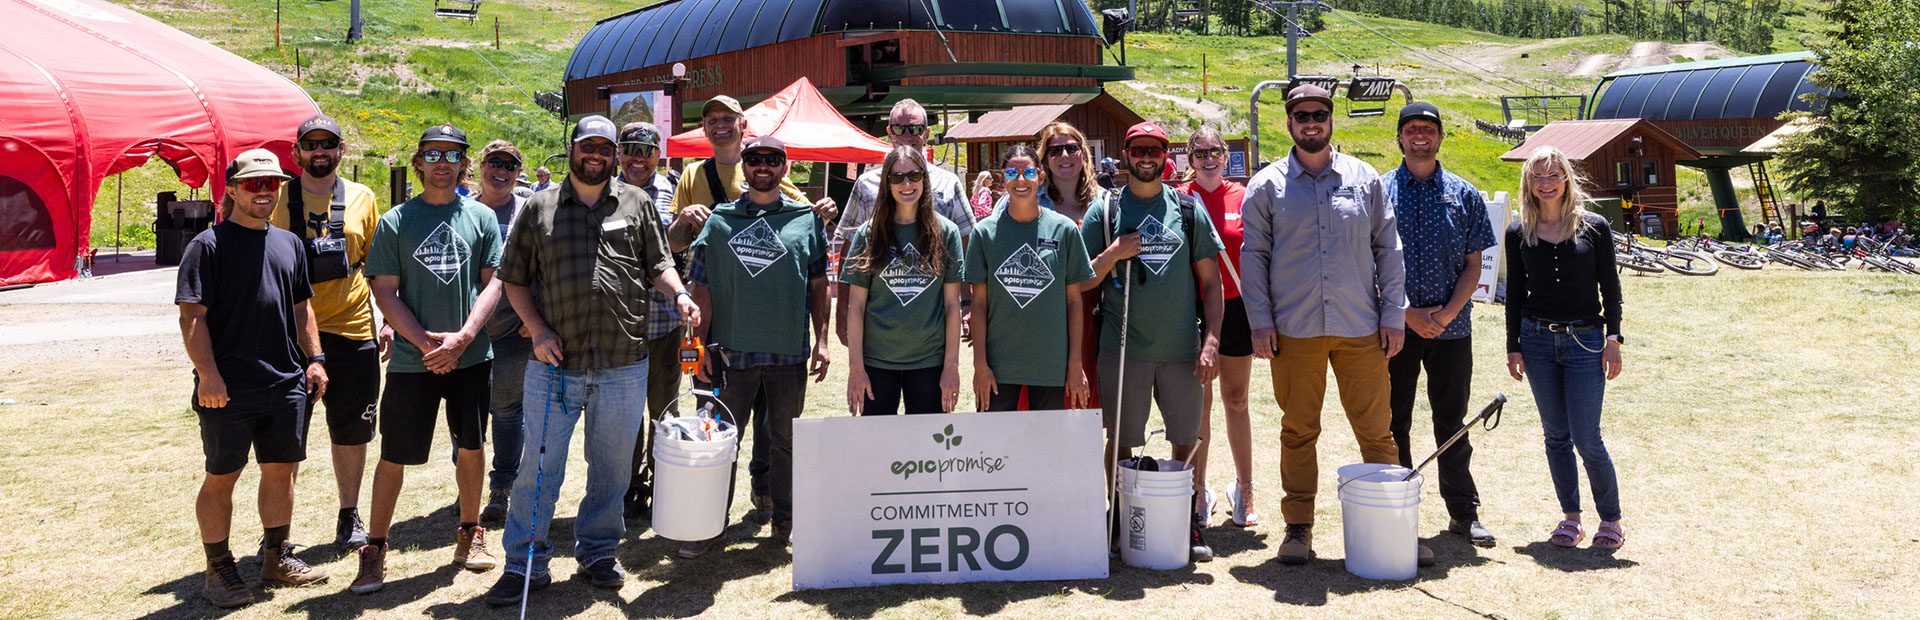 Vail employees standing with buckets and poles to clean up trash at the base of a ski lift in the summer